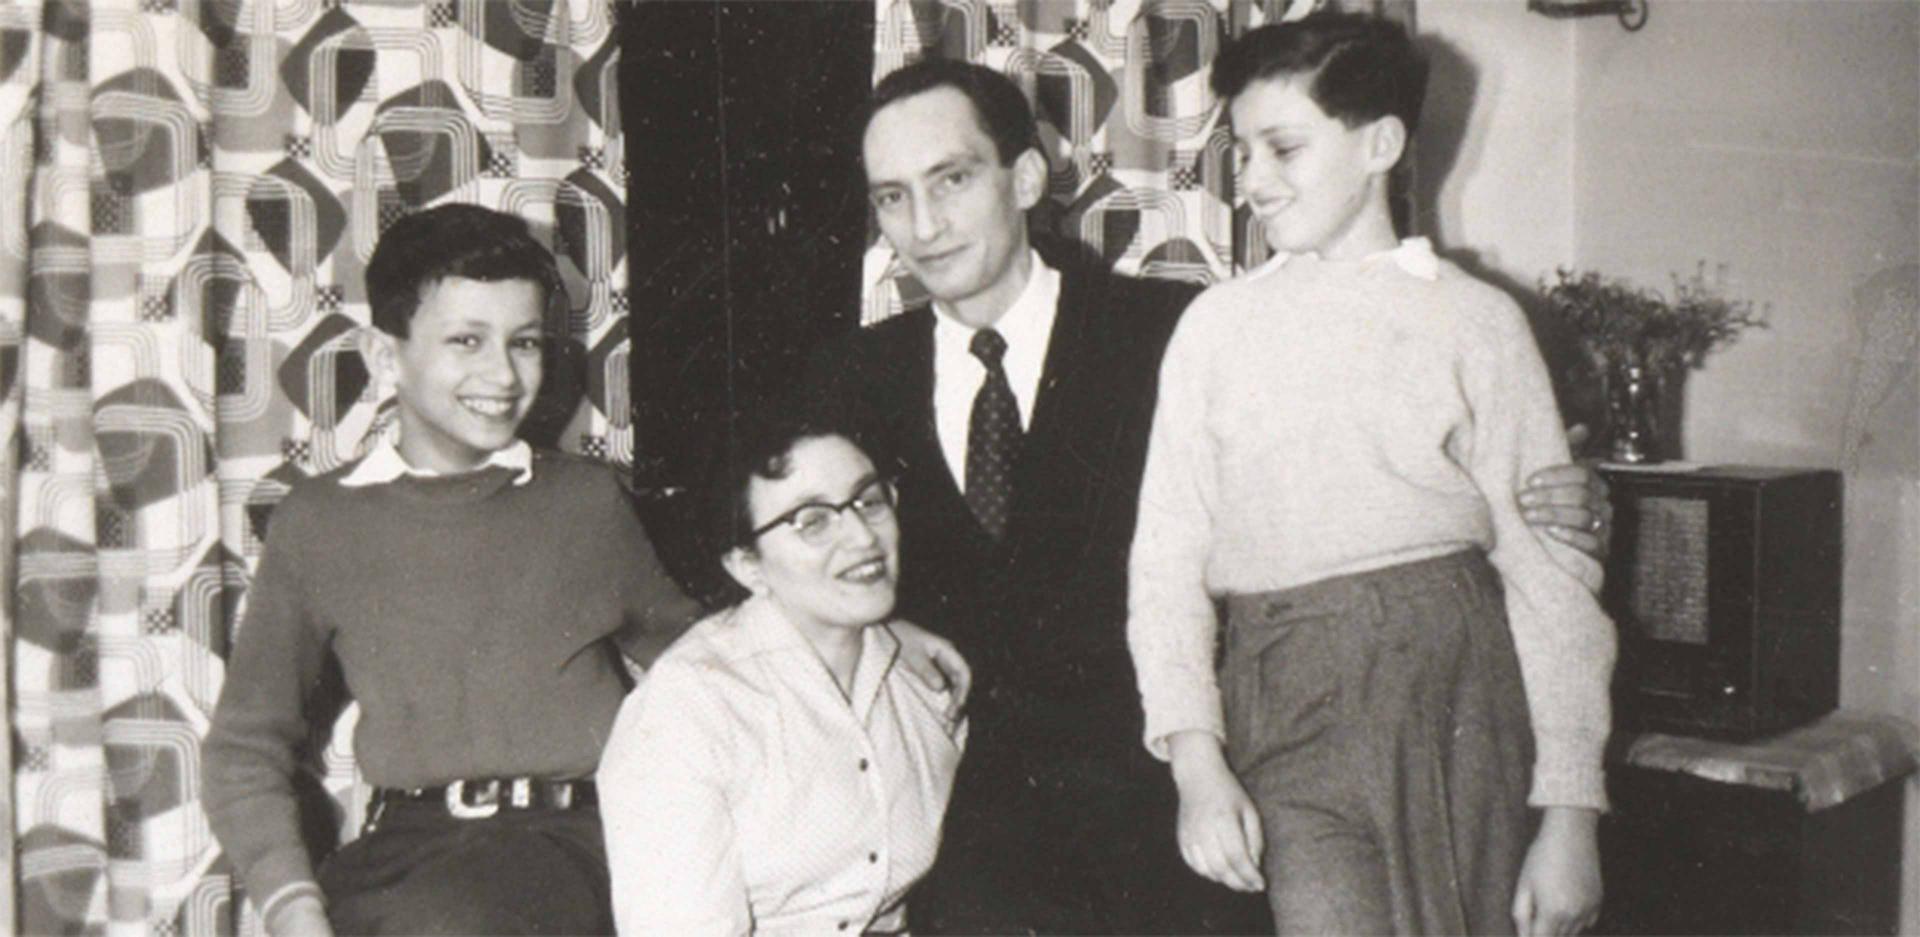 The photo shows two adults and two children in an apartment with patterned curtains. The two boys are standing to the right and left of the adults, in the middle is a woman with glasses, next to her is a man in a suit.